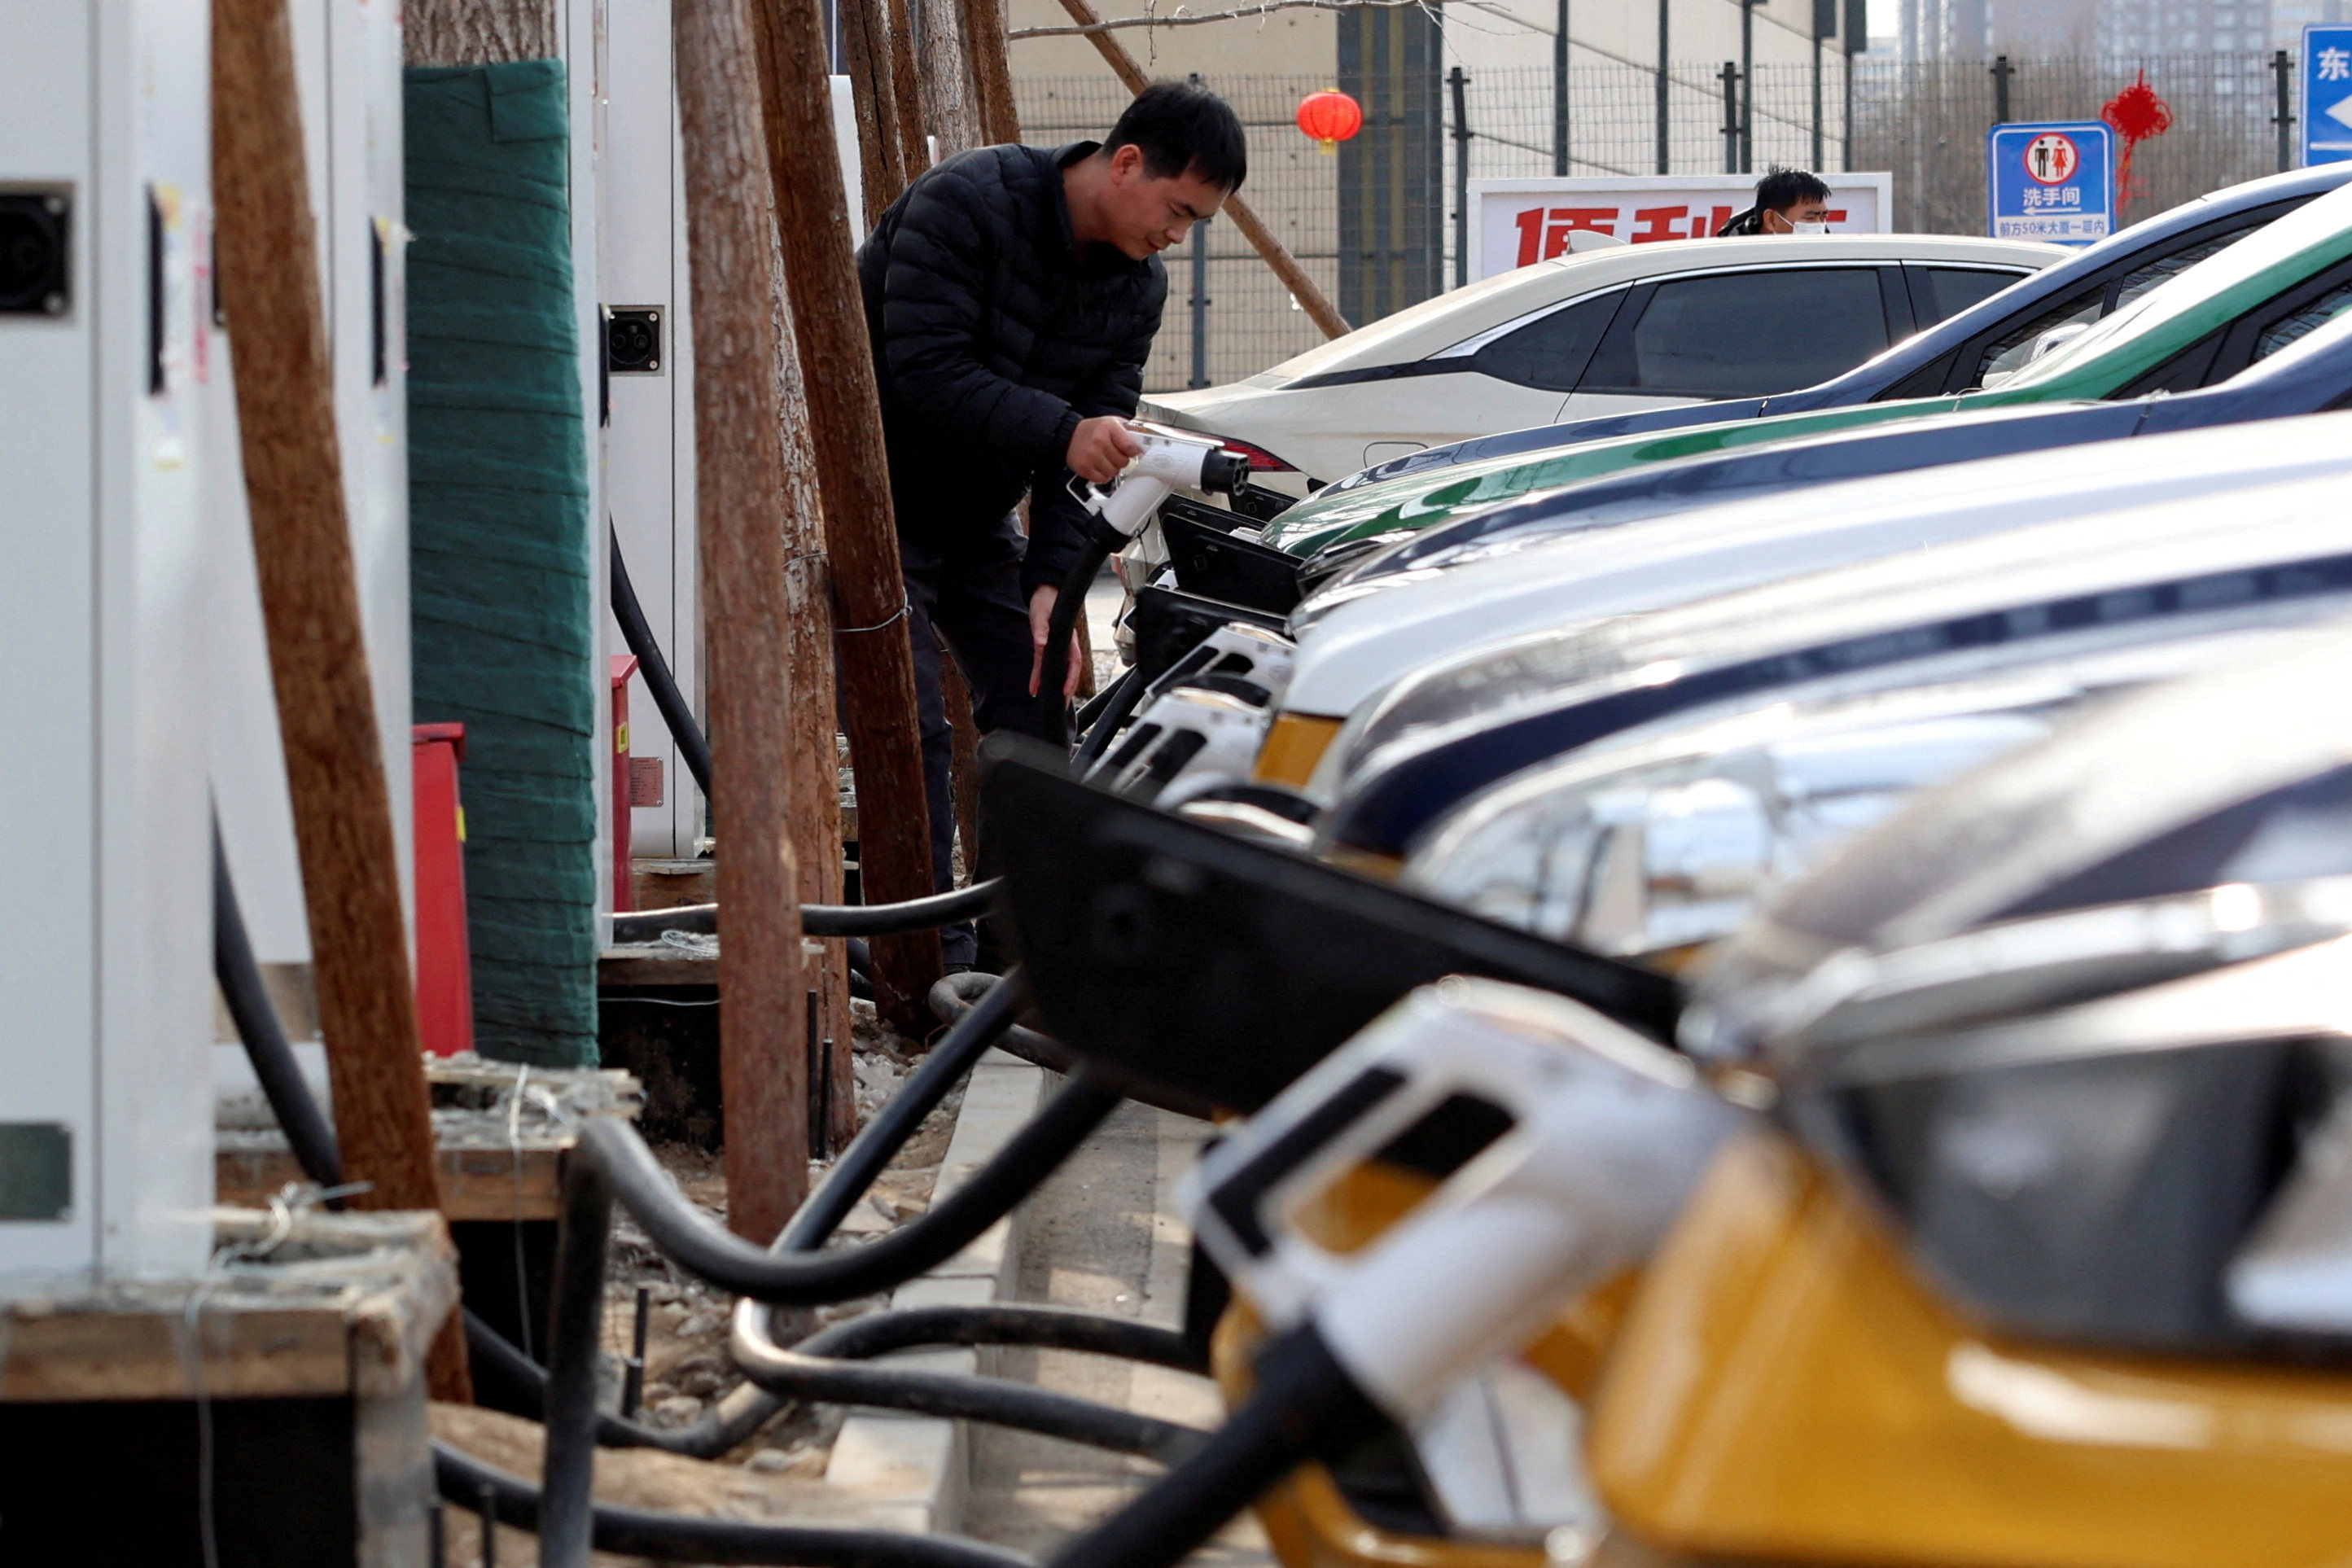 Beijing is flooding global markets with underpriced Chinese electric vehicle exports, US President Joe Biden says. Photo: Reuters